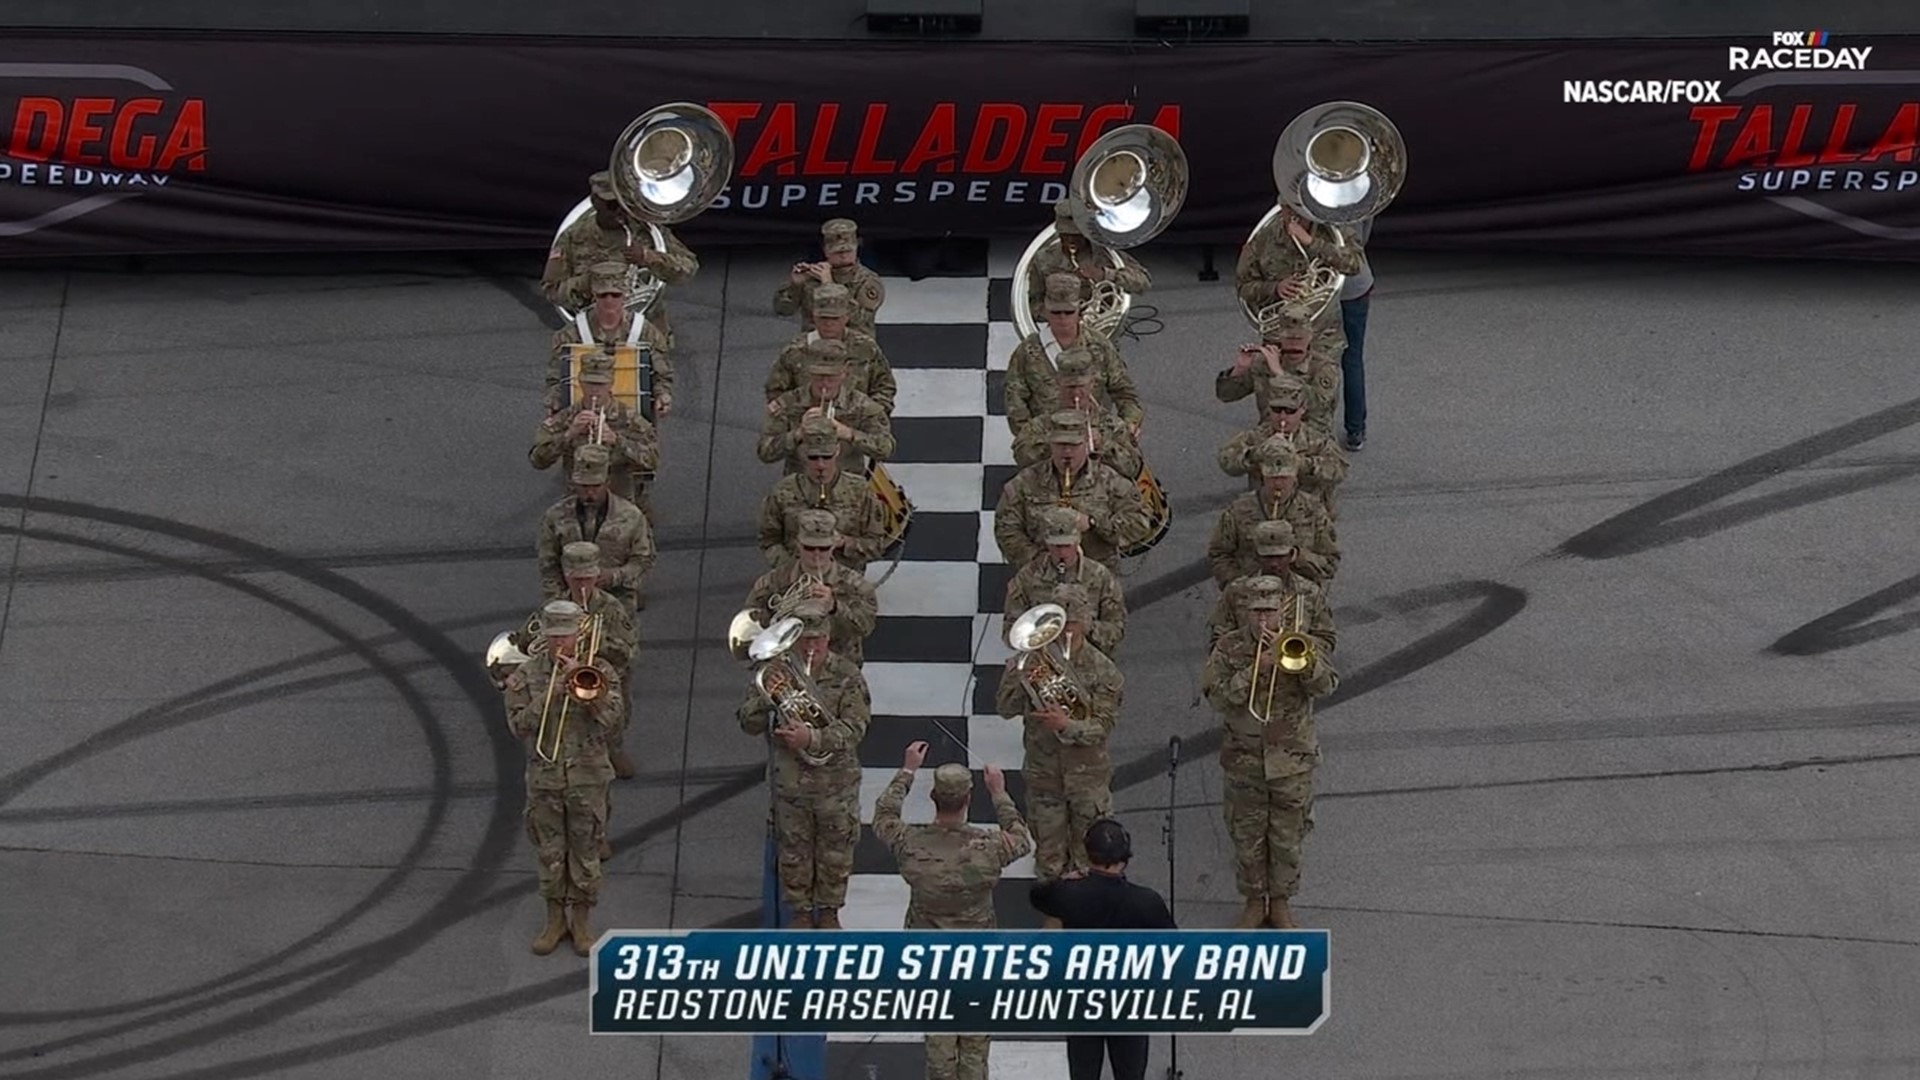 The Redstone Arsenal-based musical outfit opened the game with the national anthem.